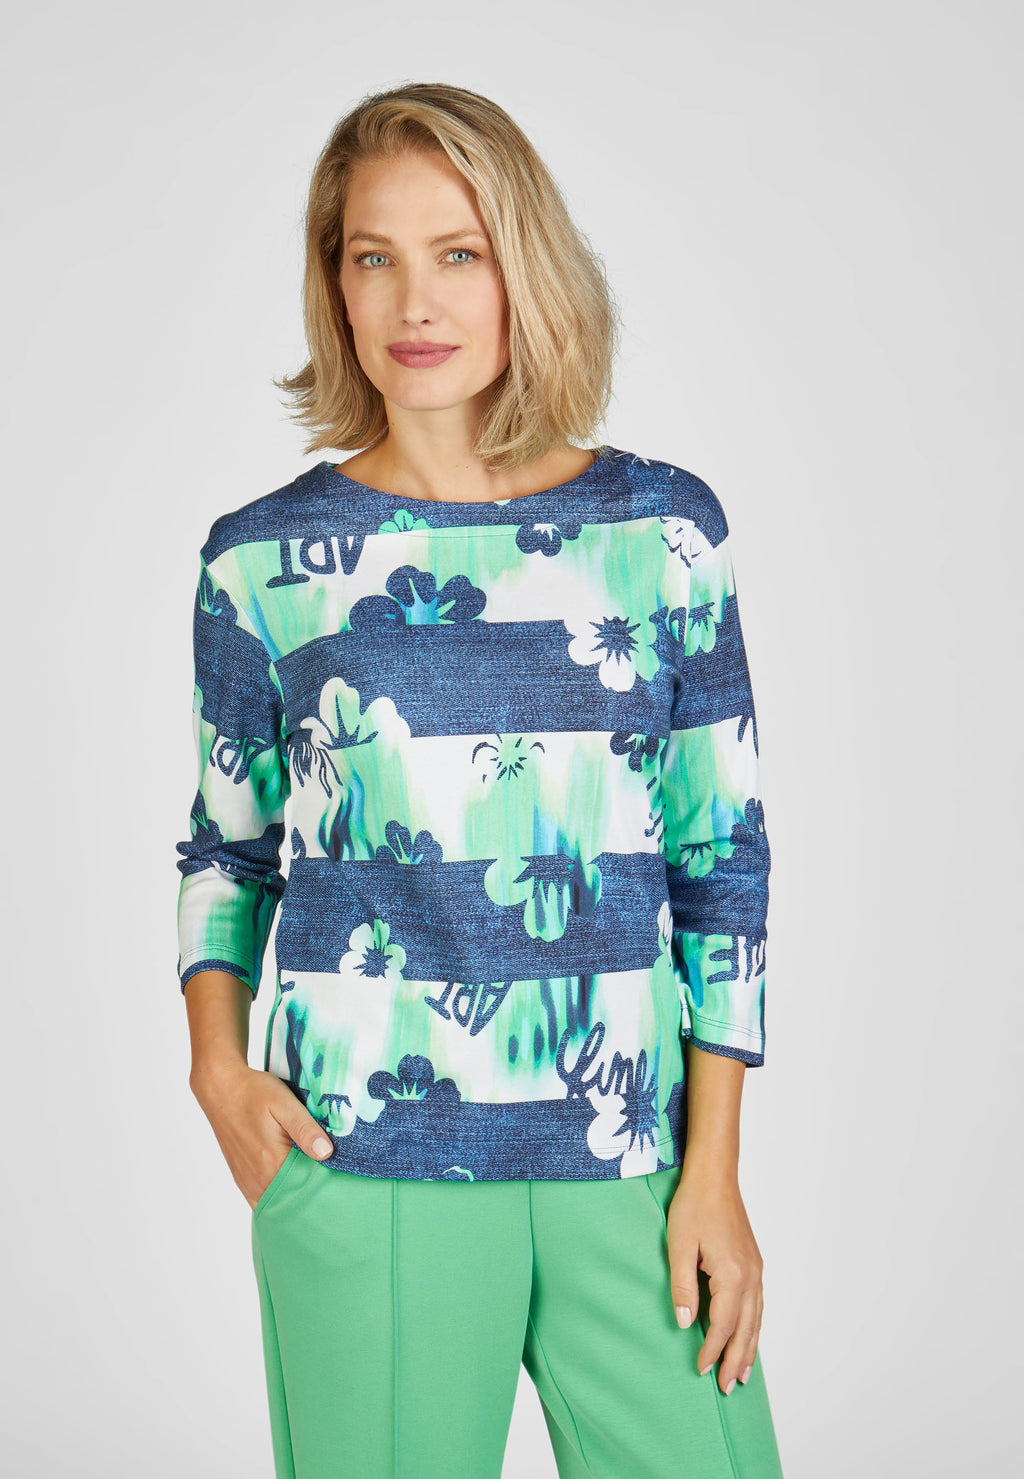 Rabe street cafe collection floral and striped printed top in green and navy, product code 52-114353